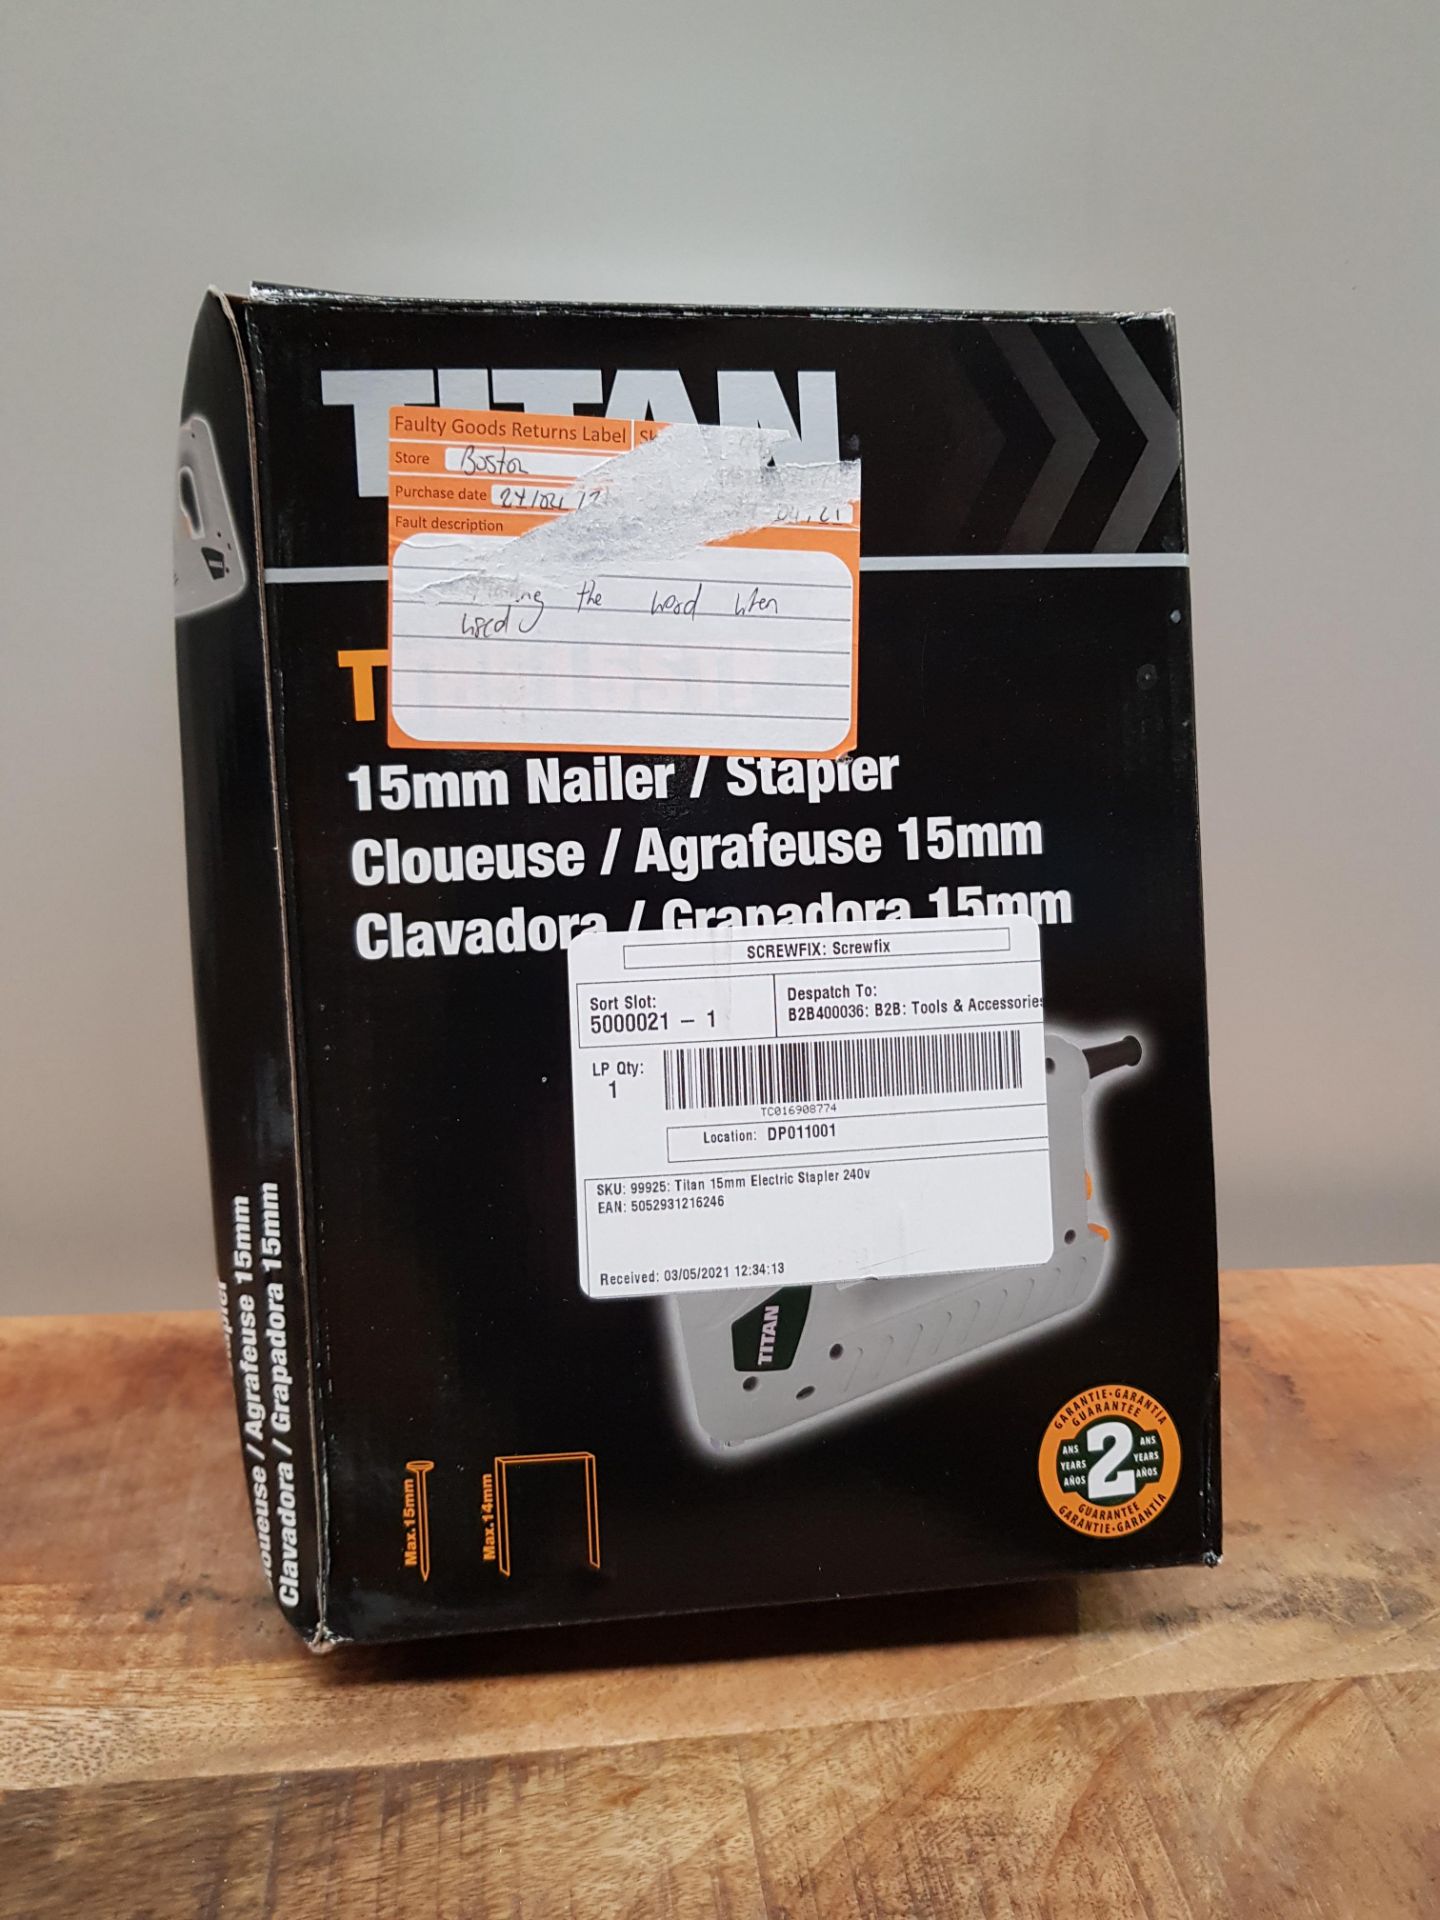 Titan 15mm Electric Stapler 240v £15.77Condition ReportAppraisal Available on Request- All Items are